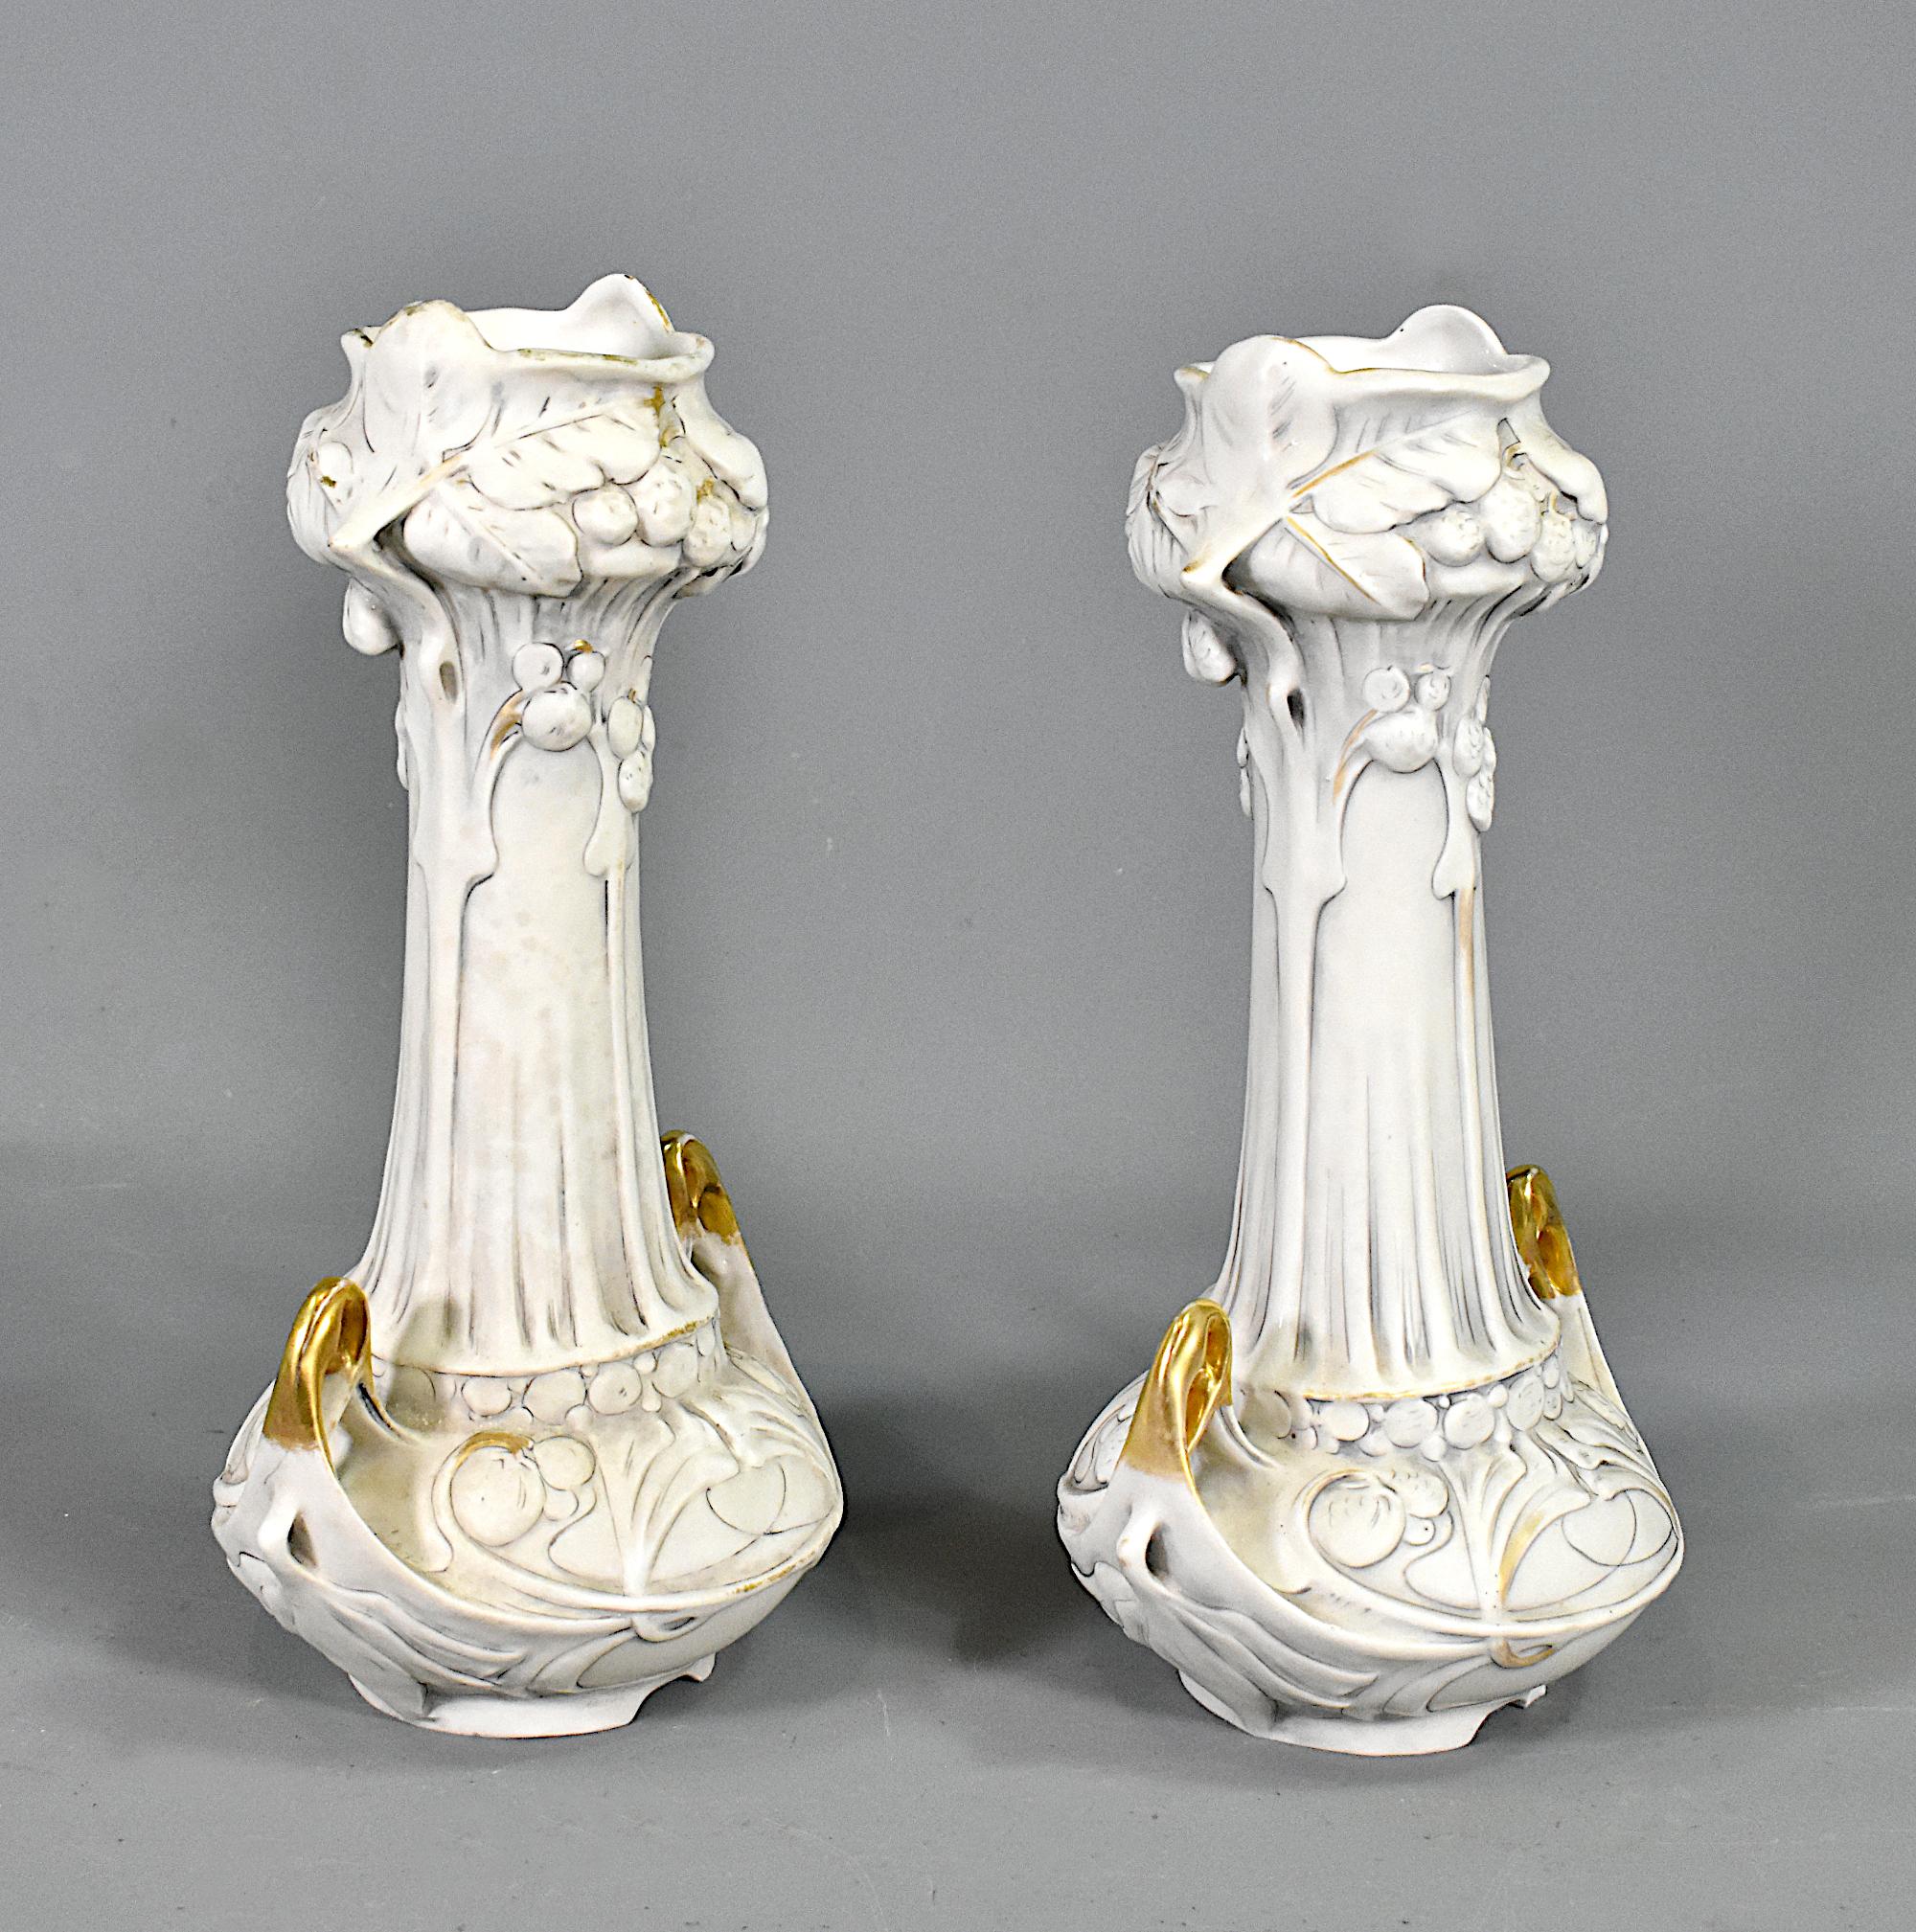 Pair of Art Nouveau Vases by Royal Dux Bohemia 

A lovely pair of Art Nouveau vases by Royal Dux Bohemia in biscuit porcelain with relief and partial gilding. 

The vases feature delicate woodland berries and floral decoration in classic Art Nouveau